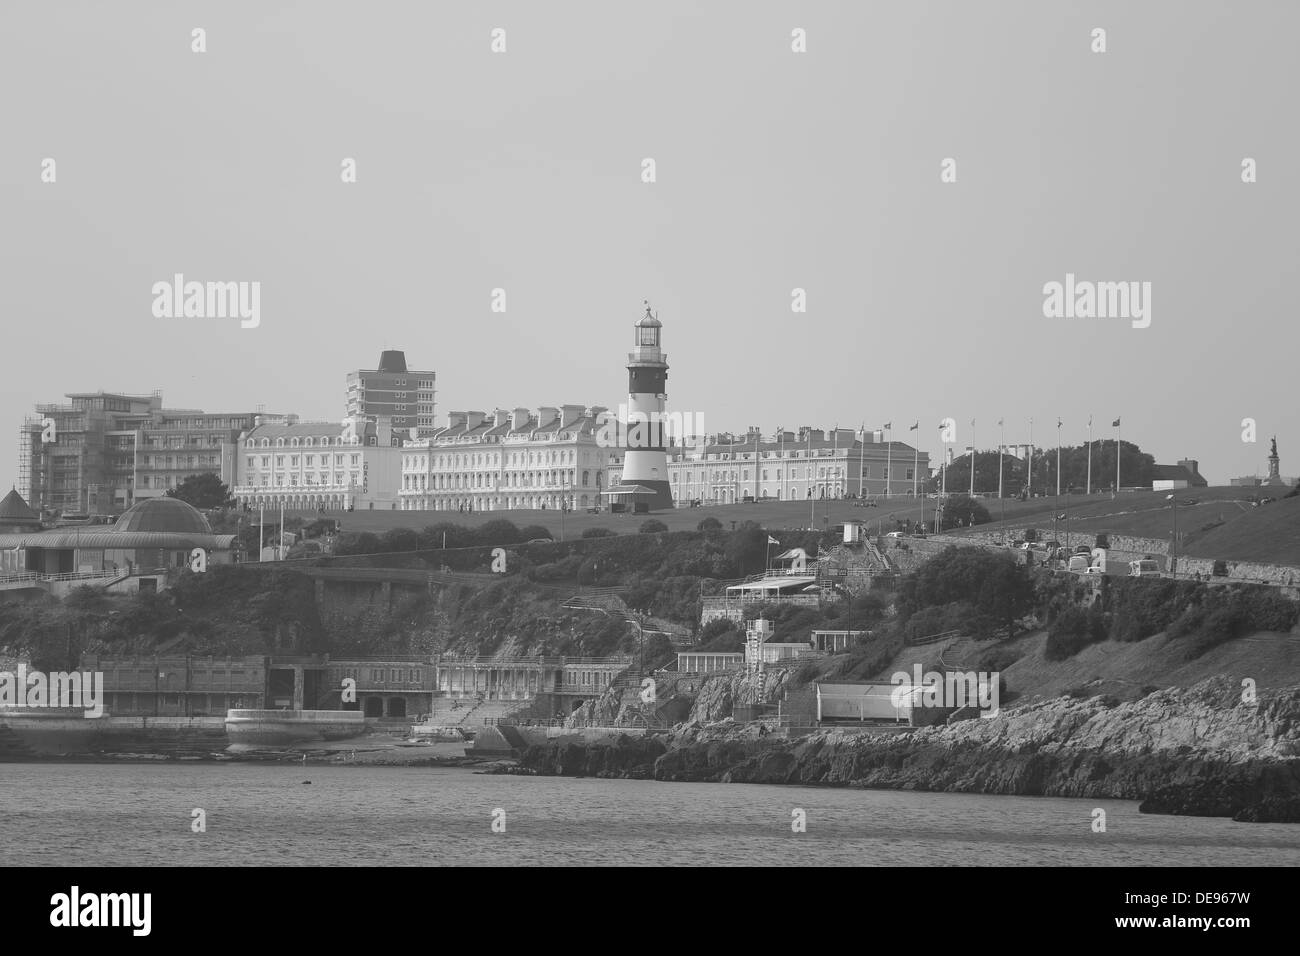 Smeatons Tower Lighthouse Plymouth Hoe Plymouth Devon UK Foto Stock